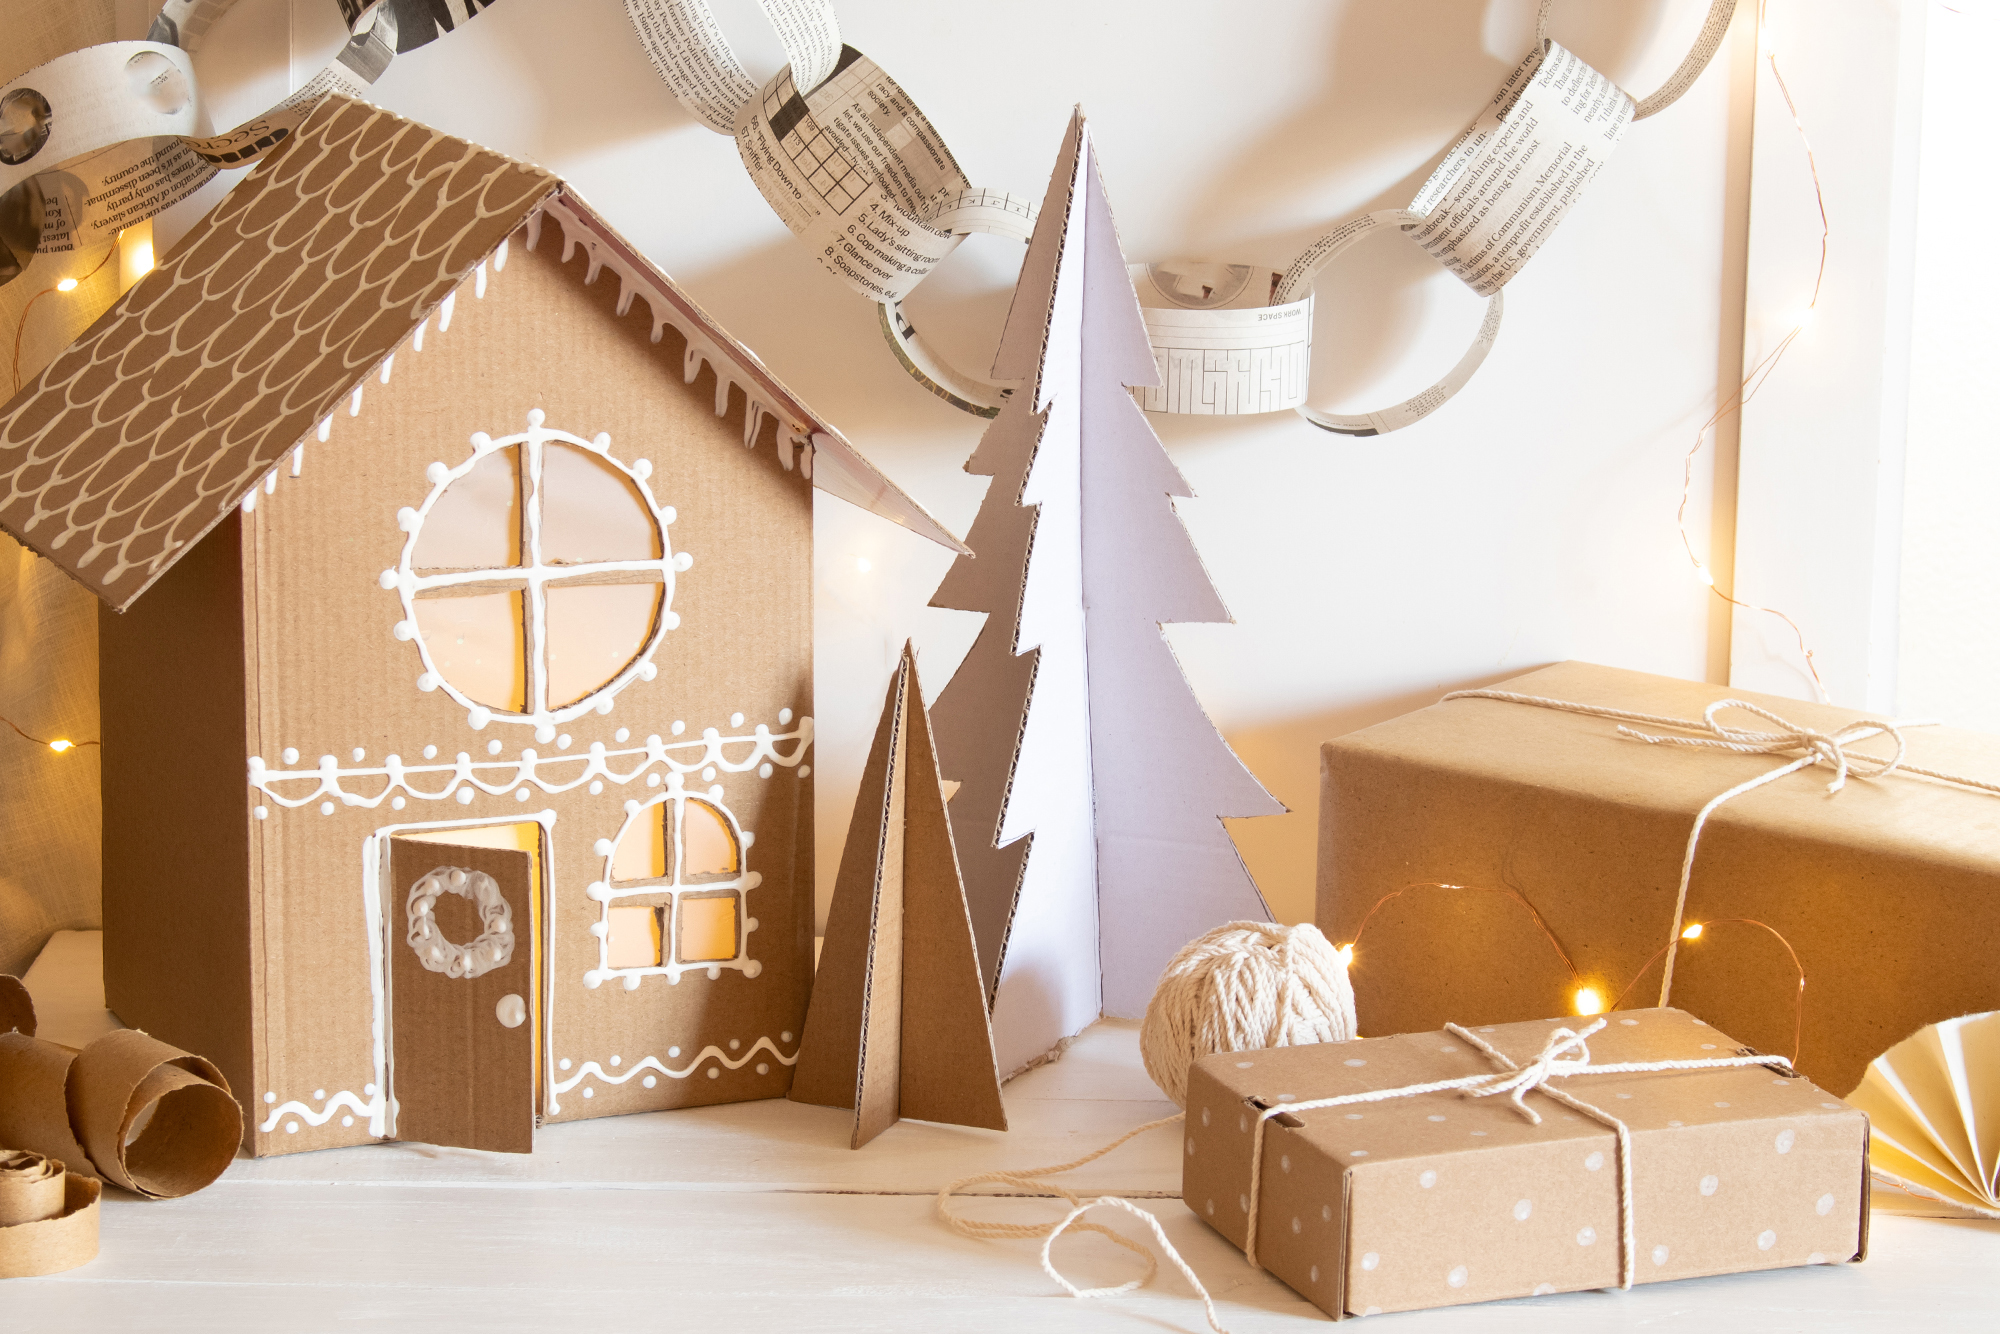 Holiday DIY crafts, featuring repurposed packaging